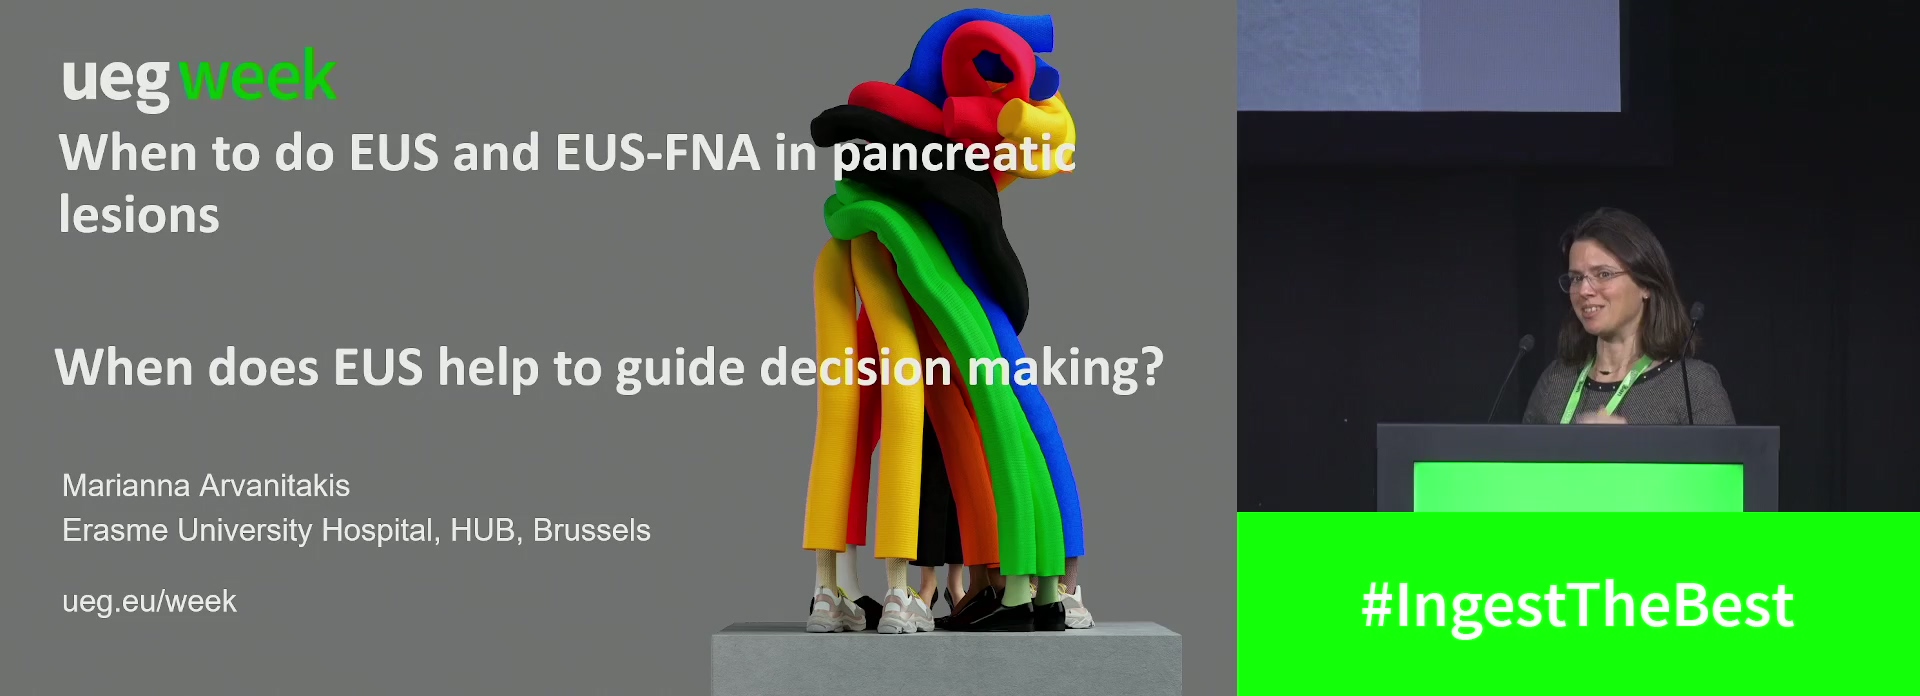 When does EUS help to guide decision making?